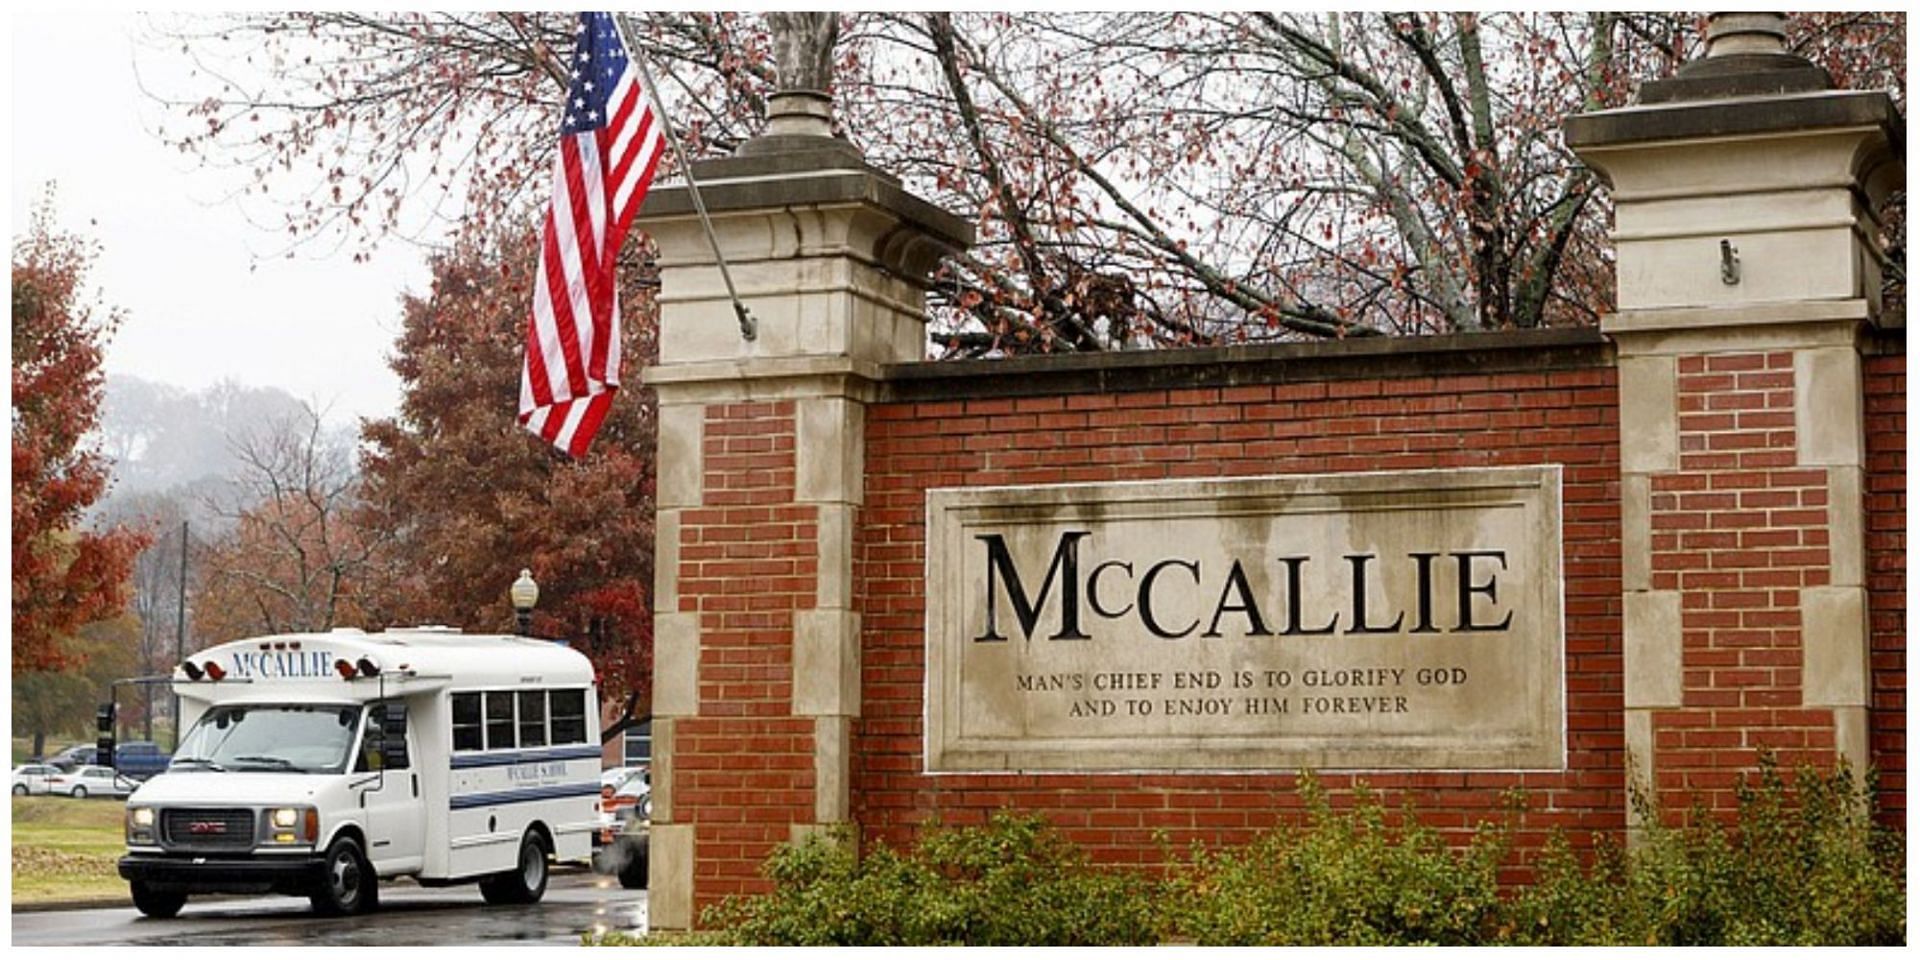 Two students from McCallie School expelled after racist video circulates online. (Image via McCallie School)